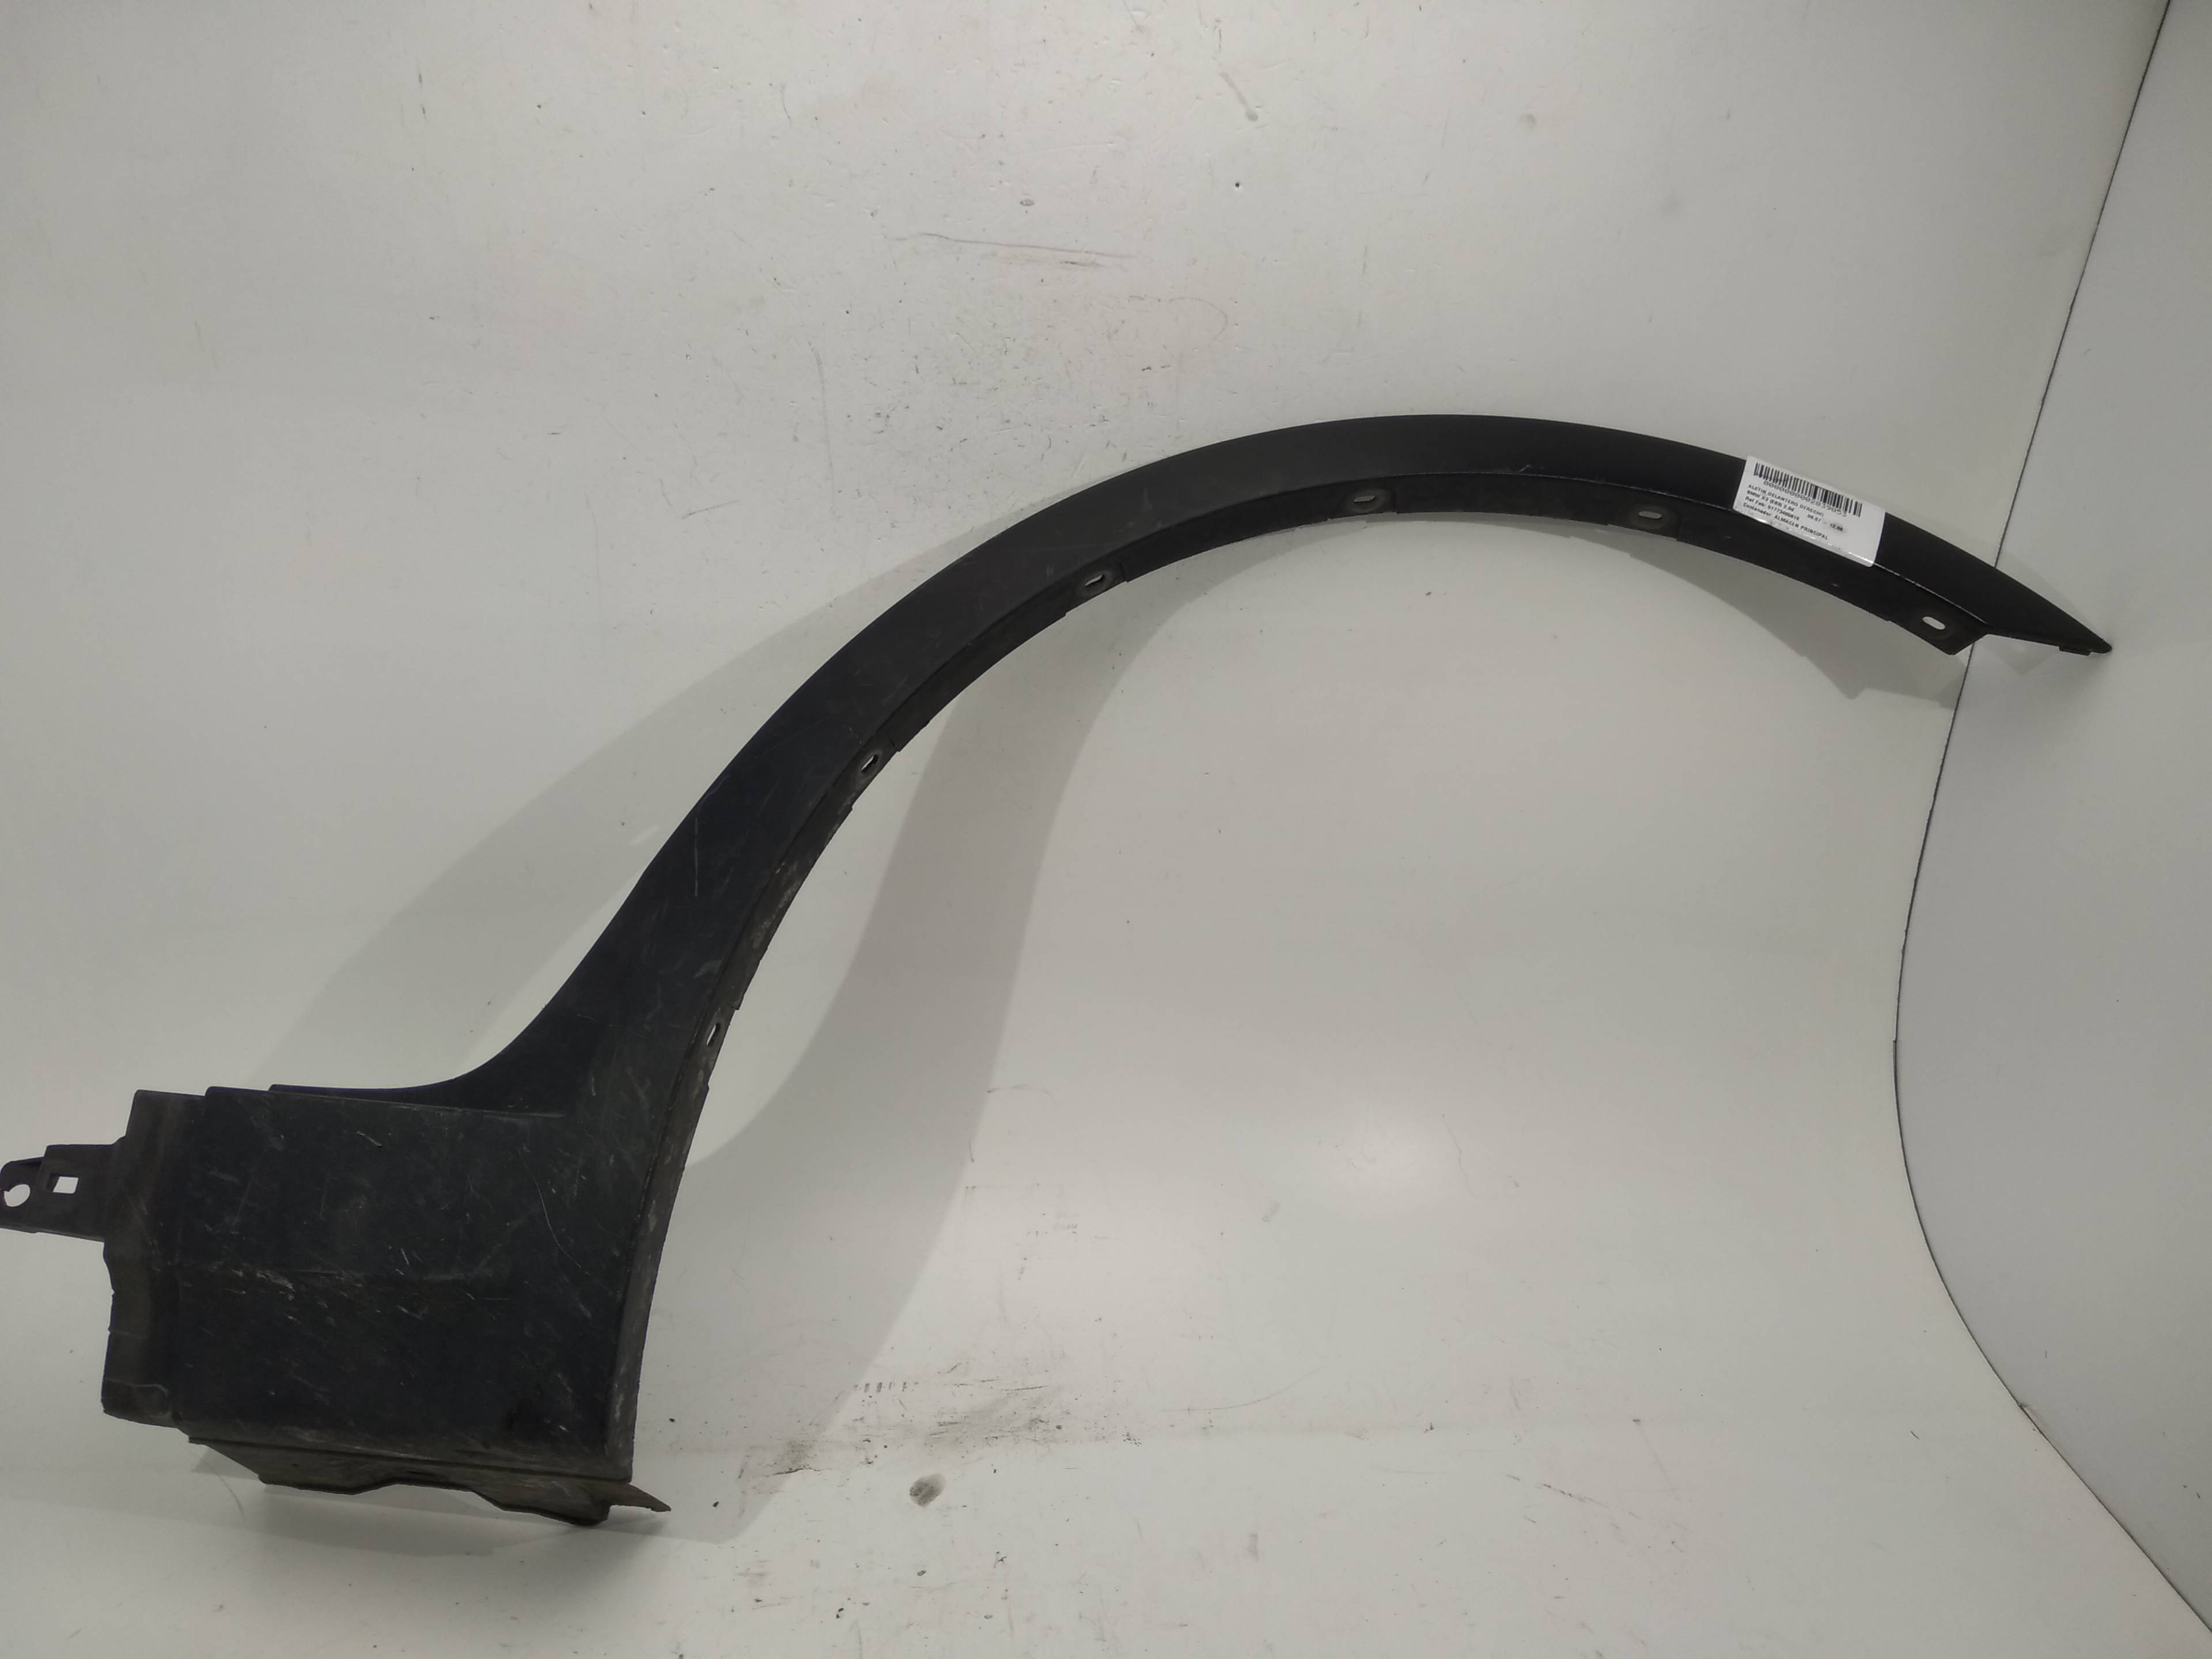 BMW X3 E83 (2003-2010) Front Right Fender Molding 51773405818, 51773405818, 51773405818 19325657